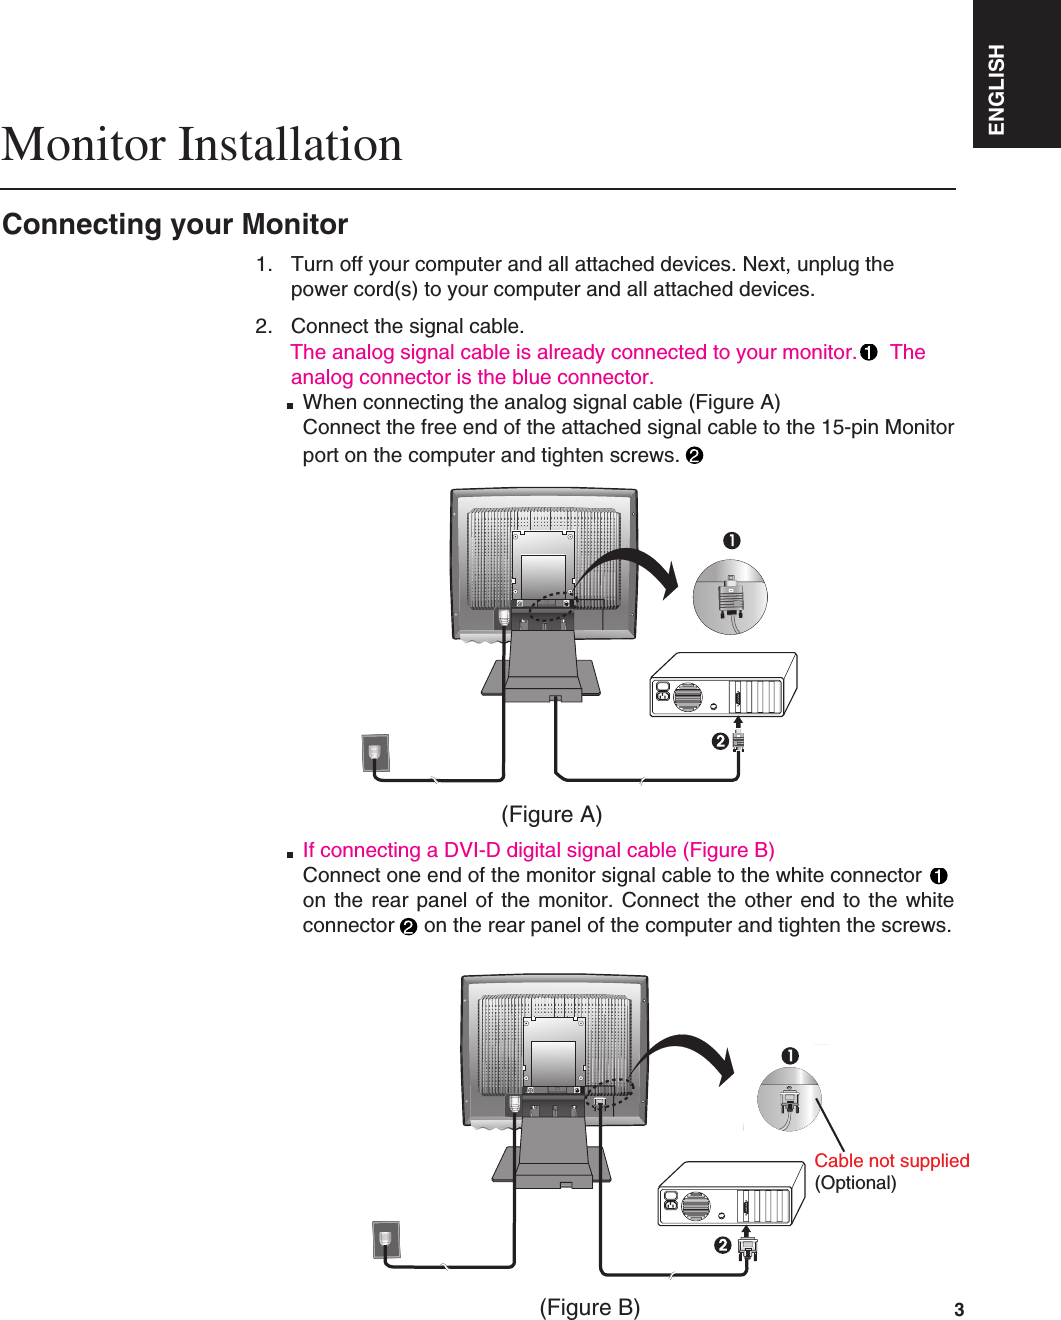 ENGLISH3Connecting your MonitorMonitor Installation1. Turn off your computer and all attached devices. Next, unplug thepower cord(s) to your computer and all attached devices.2. Connect the signal cable.The analog signal cable is already connected to your monitor. Theanalog connector is the blue connector.When connecting the analog signal cable (Figure A)Connect the free end of the attached signal cable to the 15-pin Monitorport on the computer and tighten screws.If connecting a DVI-D digital signal cable (Figure B)Connect one end of the monitor signal cable to the white connectoron the rear panel of the monitor. Connect the other end to the whiteconnector on the rear panel of the computer and tighten the screws.(Figure B)(Figure A)Cable not supplied(Optional)